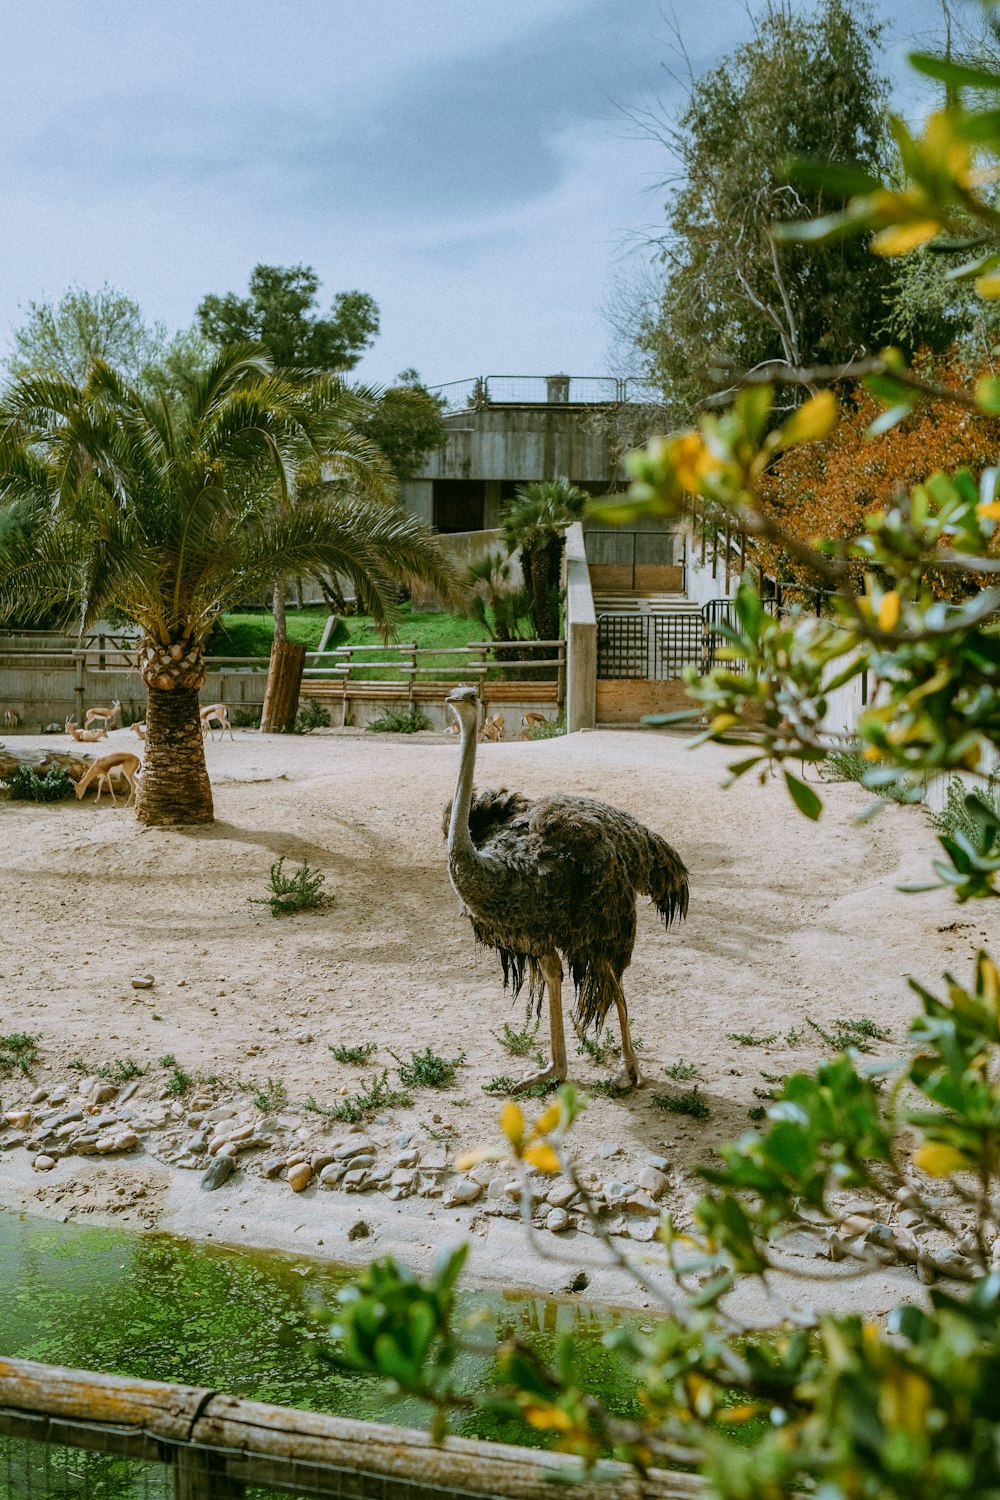 an ostrich standing in the sand near a body of water